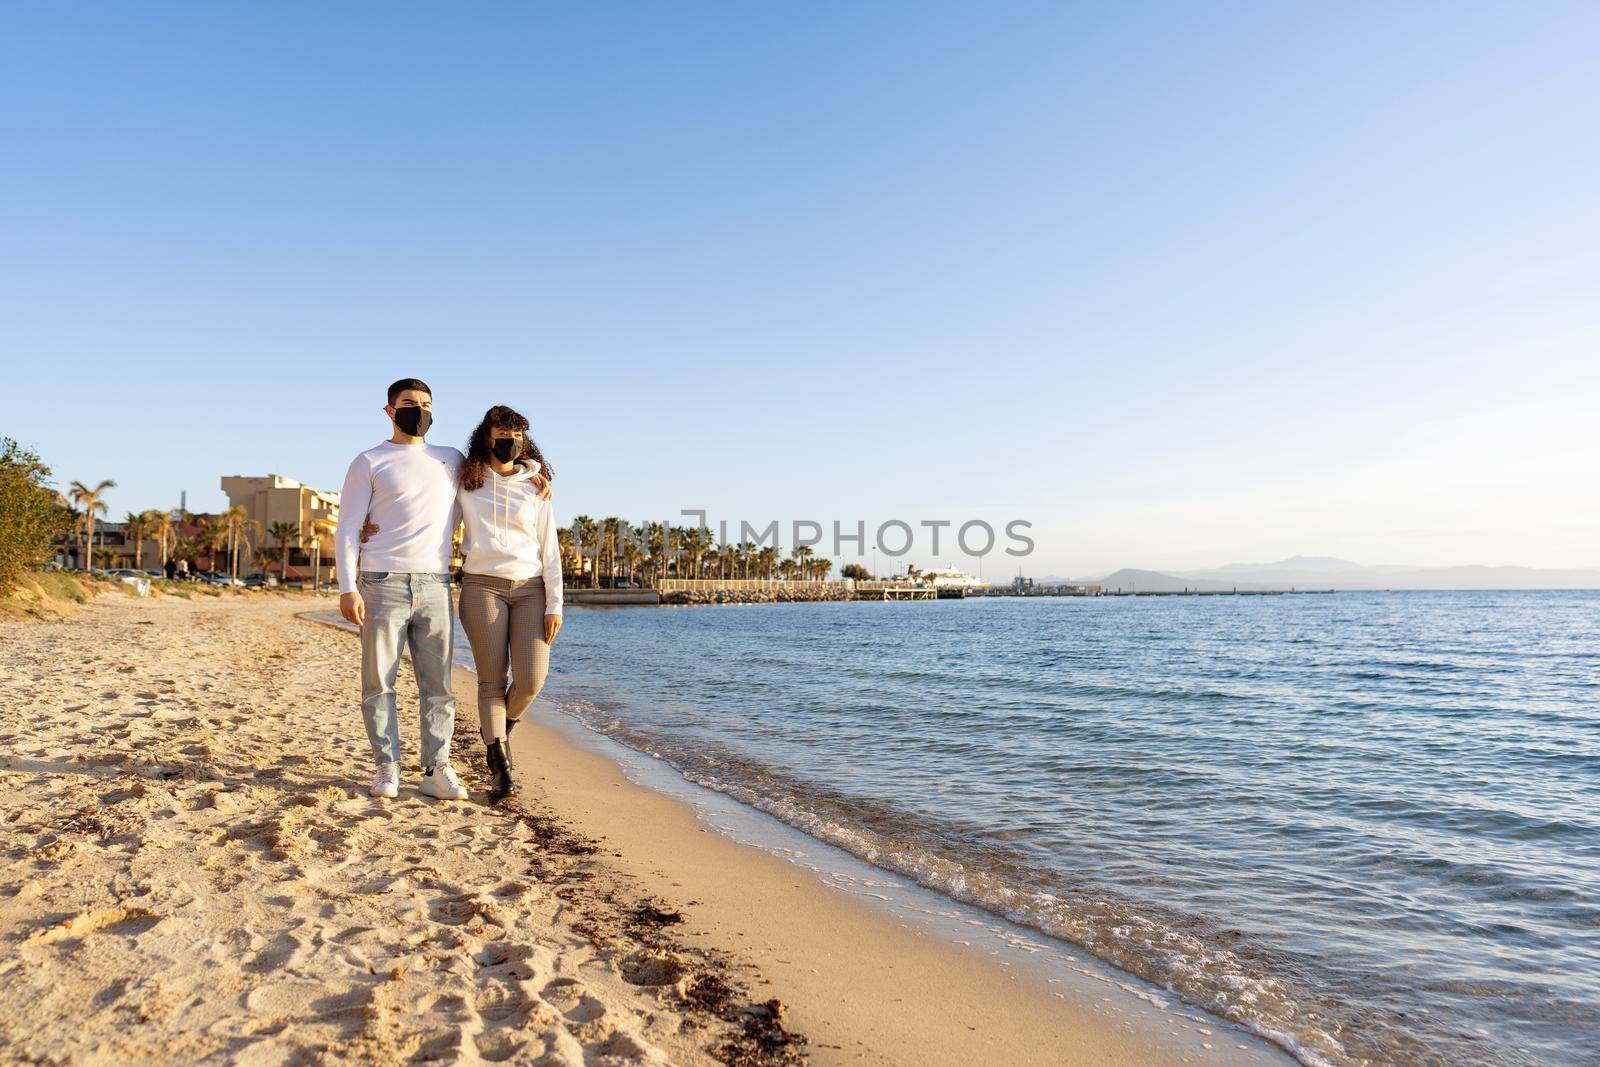 Multiracial couple of young millennials in love embracing each other while walking by the ocean seaside at sunset or sunrise wearing protective face mask against Coronavirus in new normal vacations by robbyfontanesi